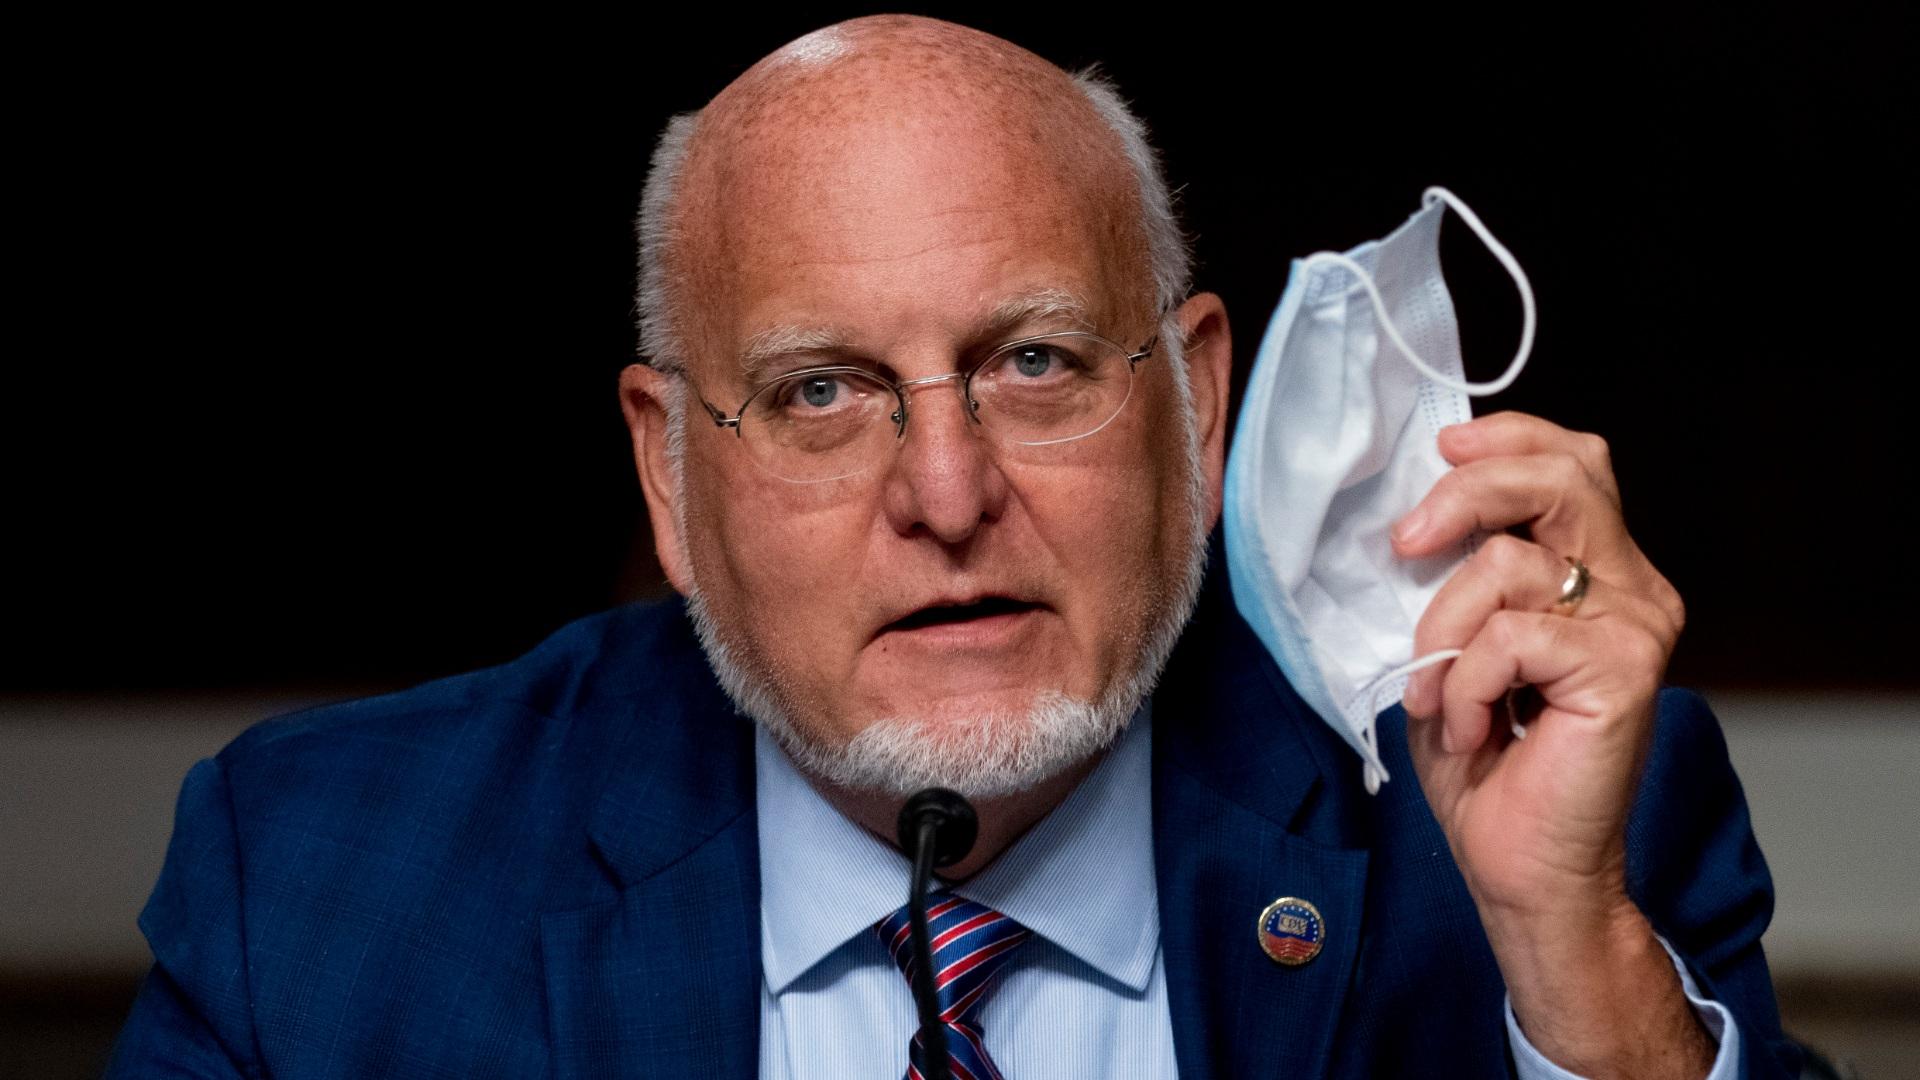 Centers for Disease Control and Prevention Director Dr. Robert Redfield holds up his mask as he speaks at a Senate Appropriations subcommittee hearing on a “Review of Coronavirus Response Efforts” on Capitol Hill, Wednesday, Sept. 16, 2020, in Washington. (AP Photo / Andrew Harnik, Pool)